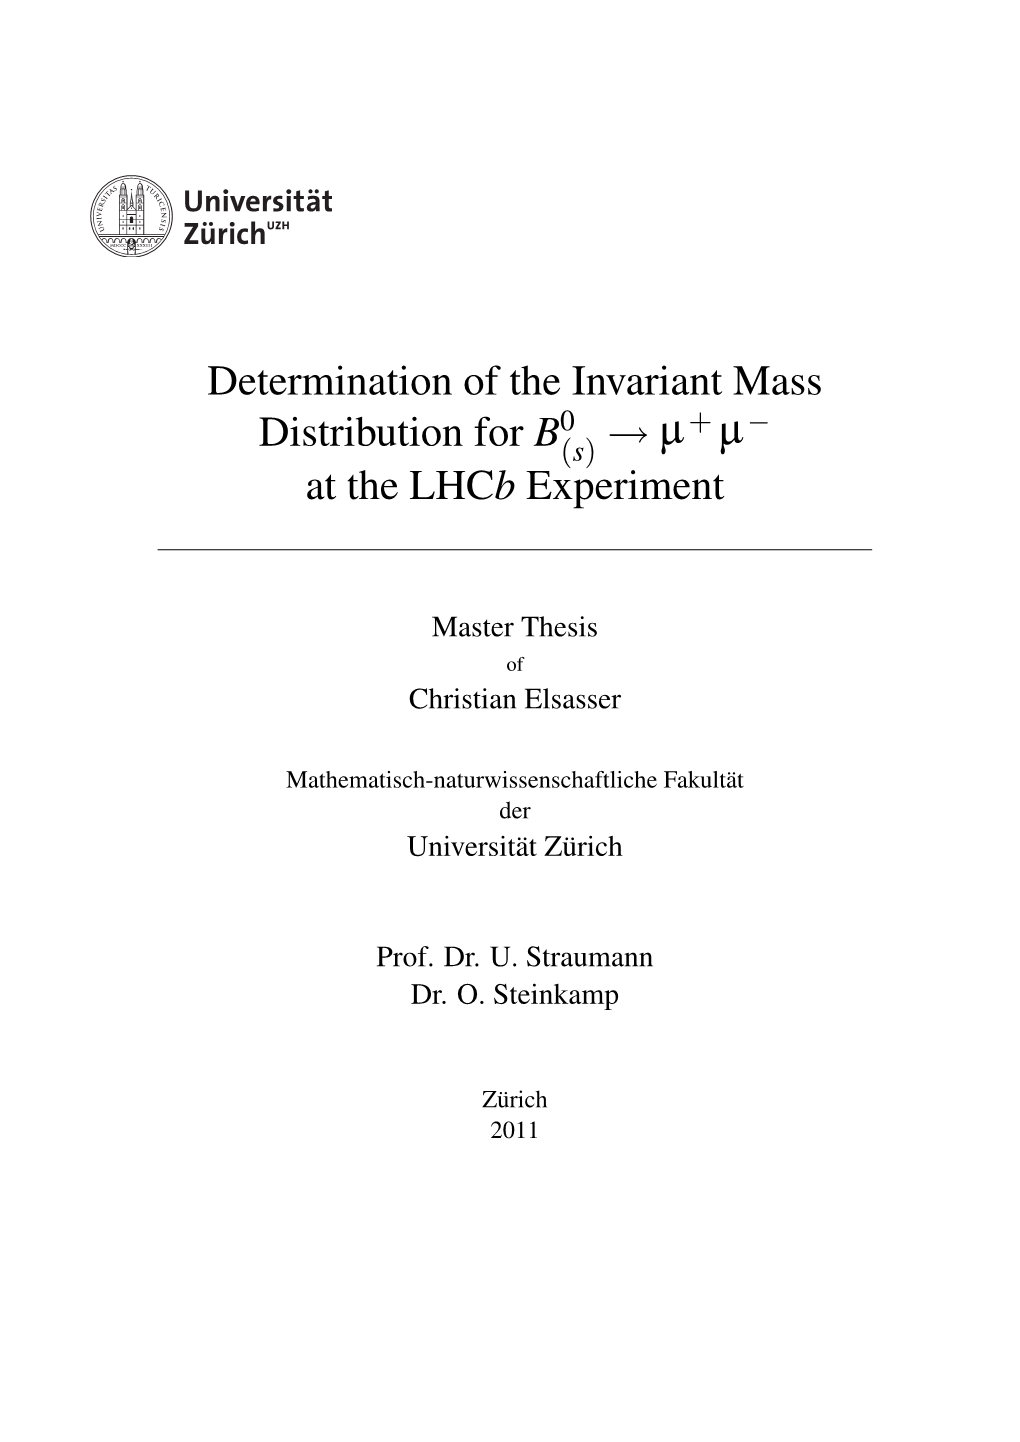 Determination of the Invariant Mass Distribution for B → Μ Μ at the Lhcb